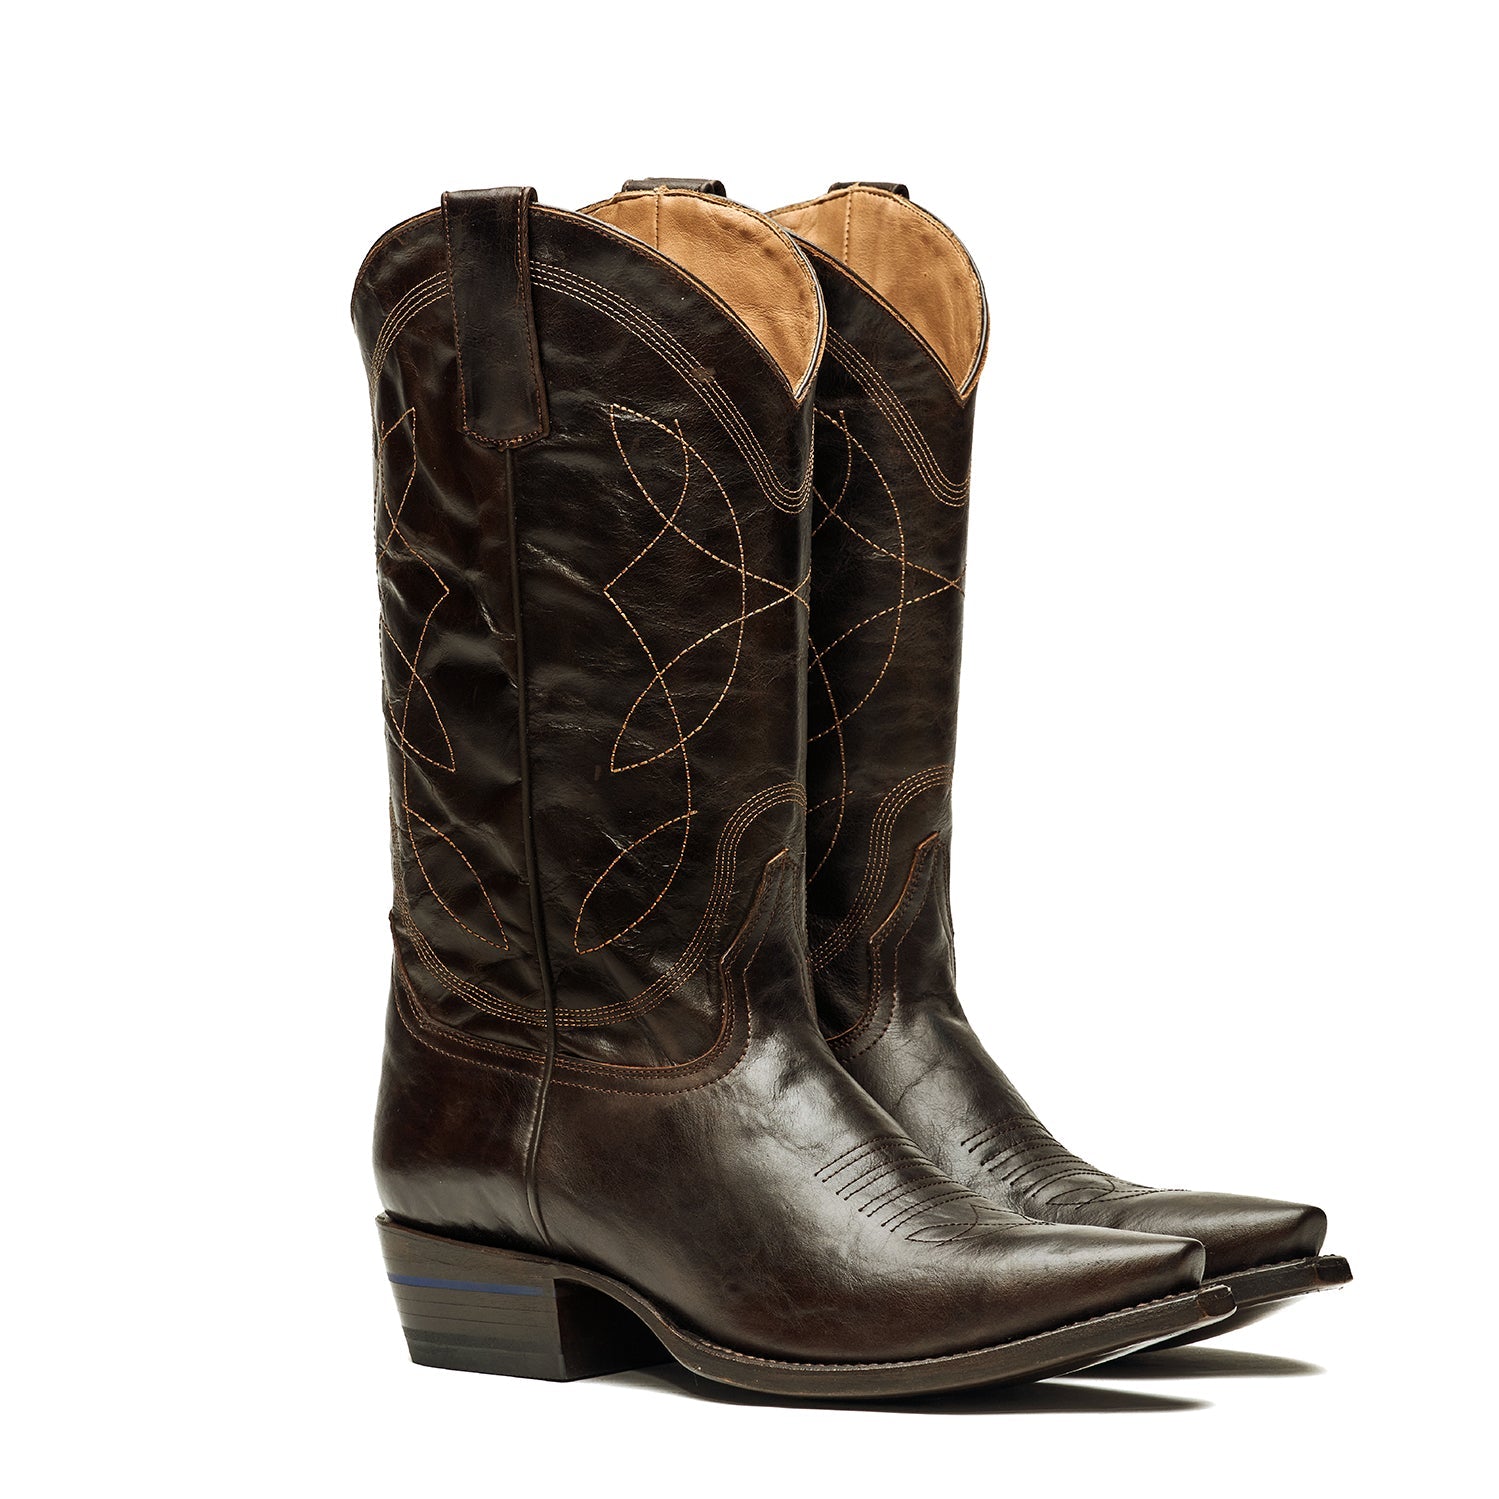 Cowboy boot toe styles (and why Alvies boots rock classic toes)